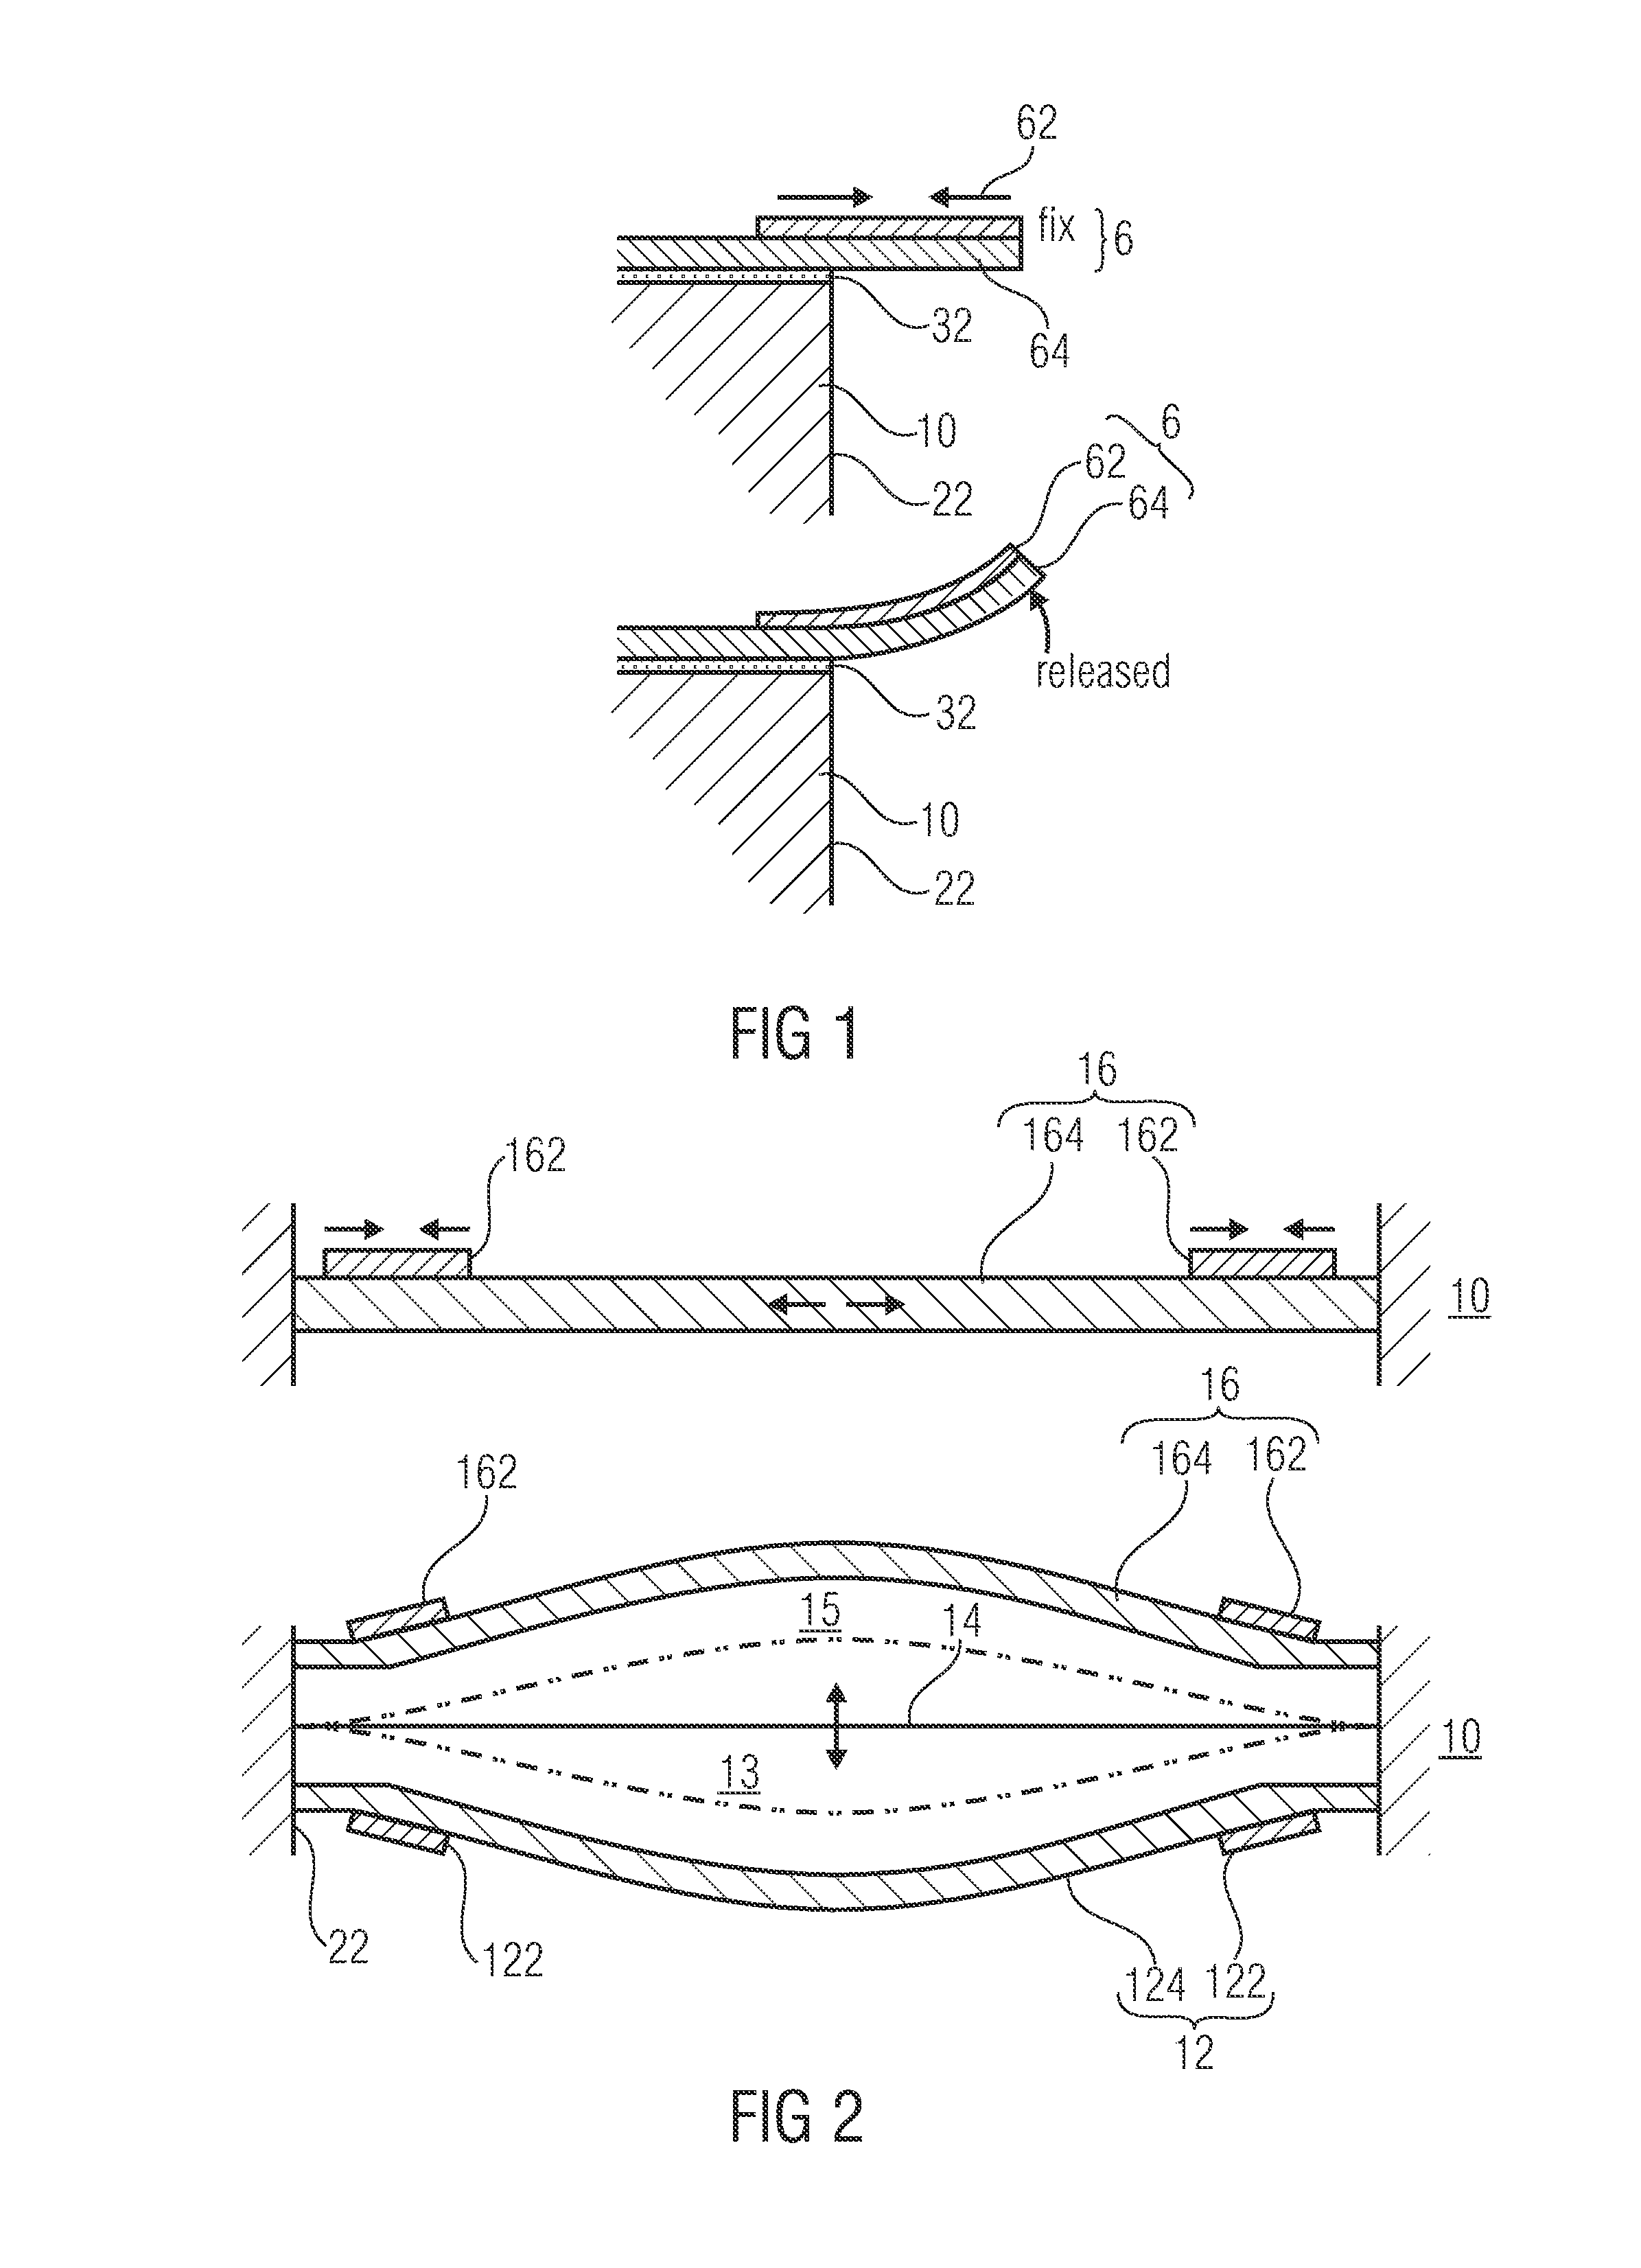 Micro electrical mechanical system with bending deflection of backplate structure